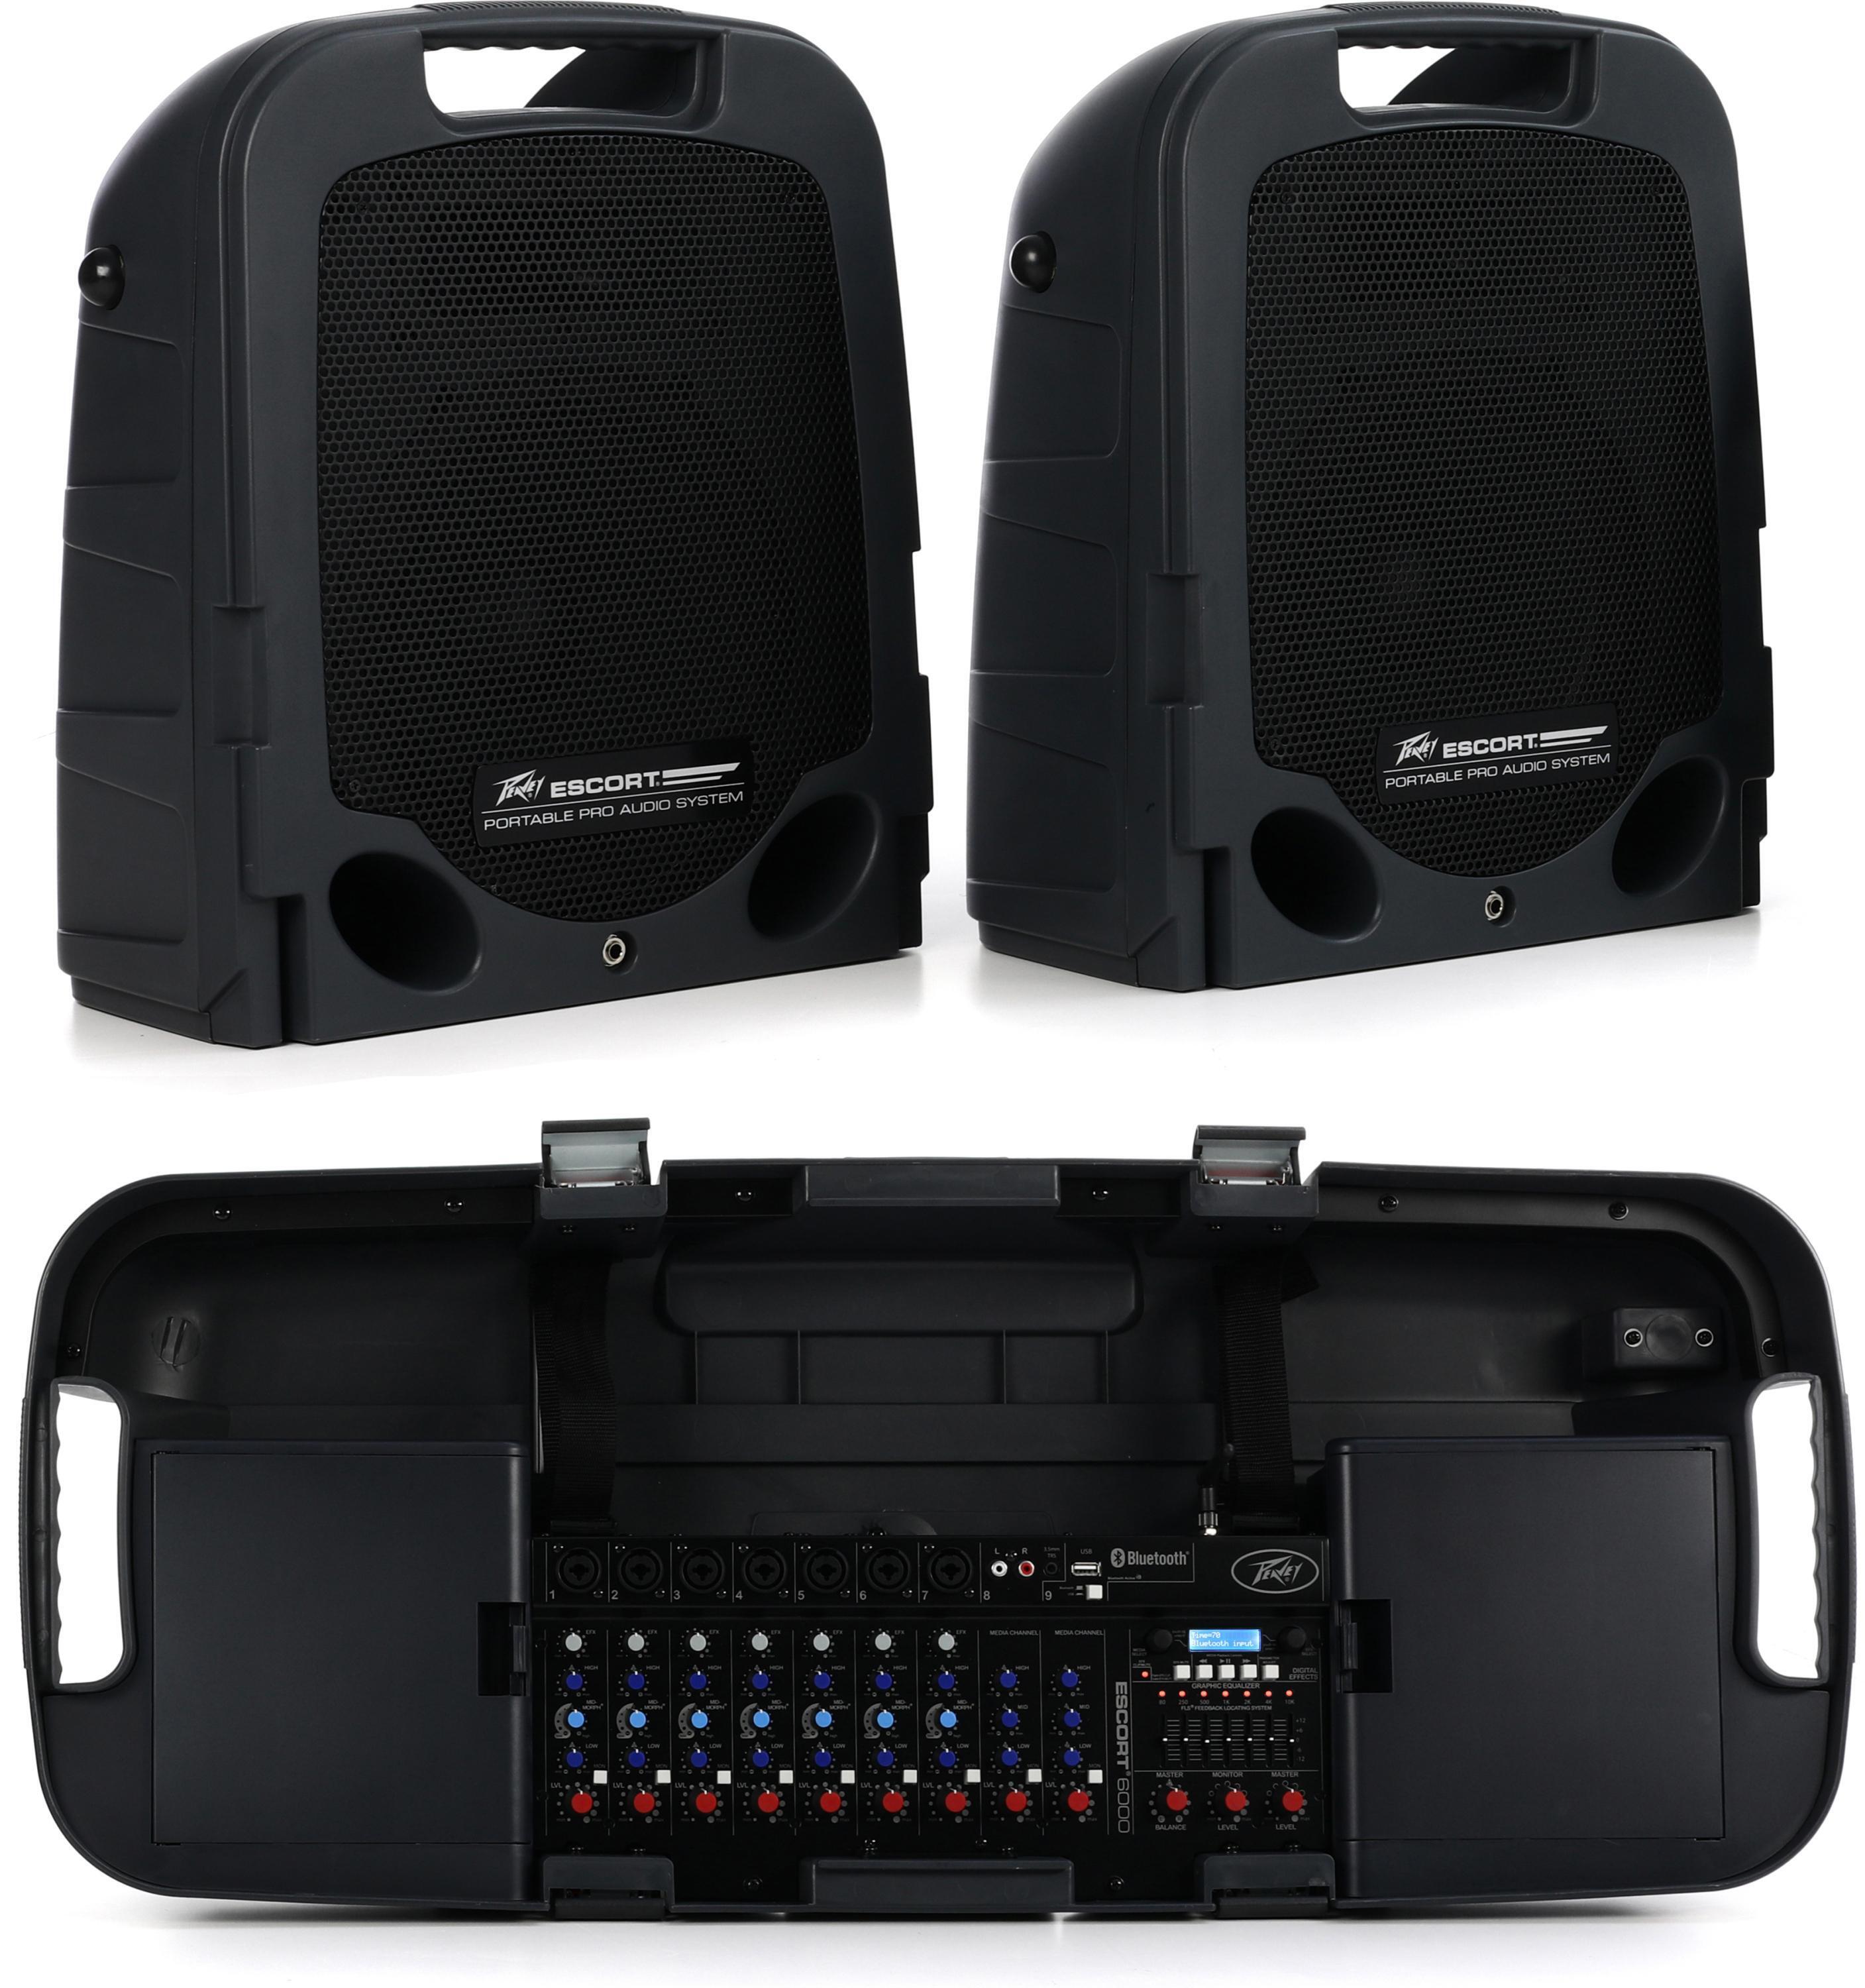 Peavey Escort 6000 Portable PA System | Sweetwater